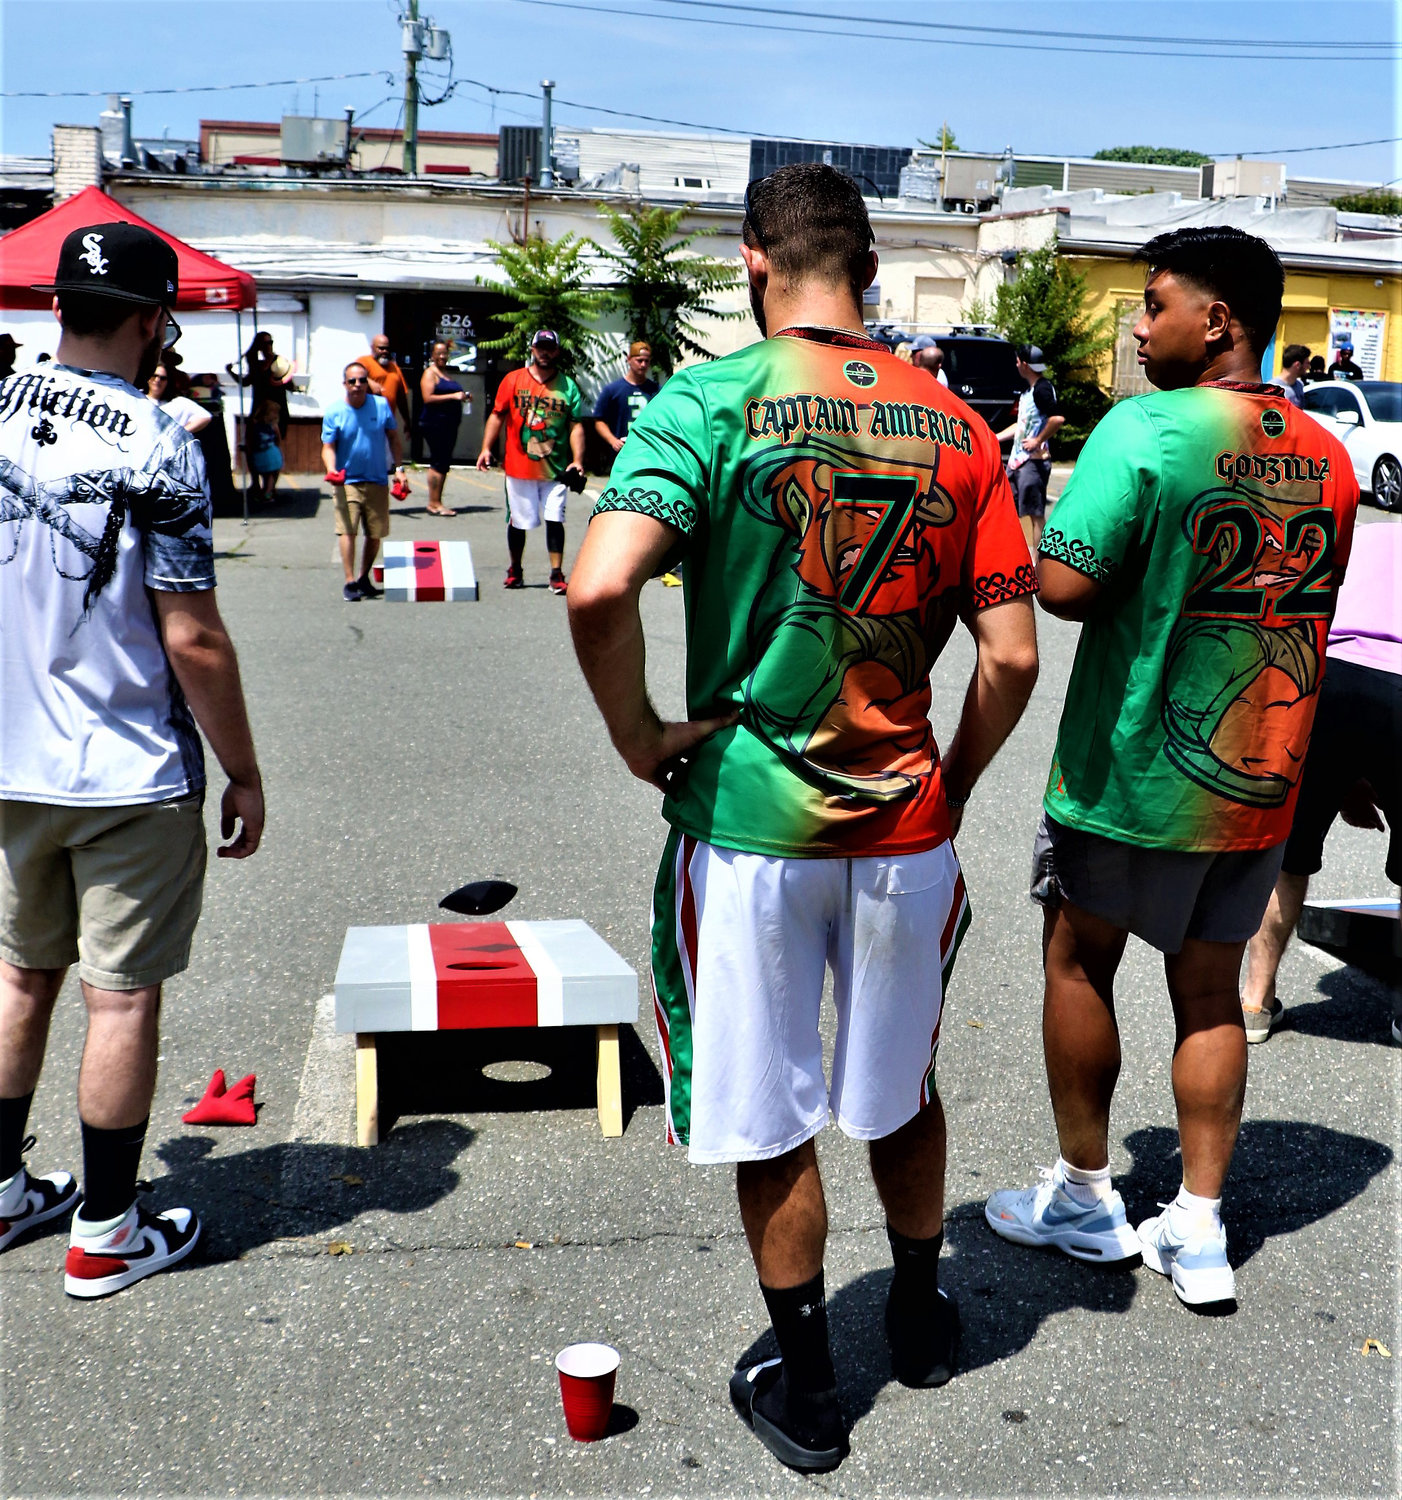 Baldwin residents played in a cornhole contest in the parking lot behind The Irish Pub, one of the sponsors of the Culture Jam.